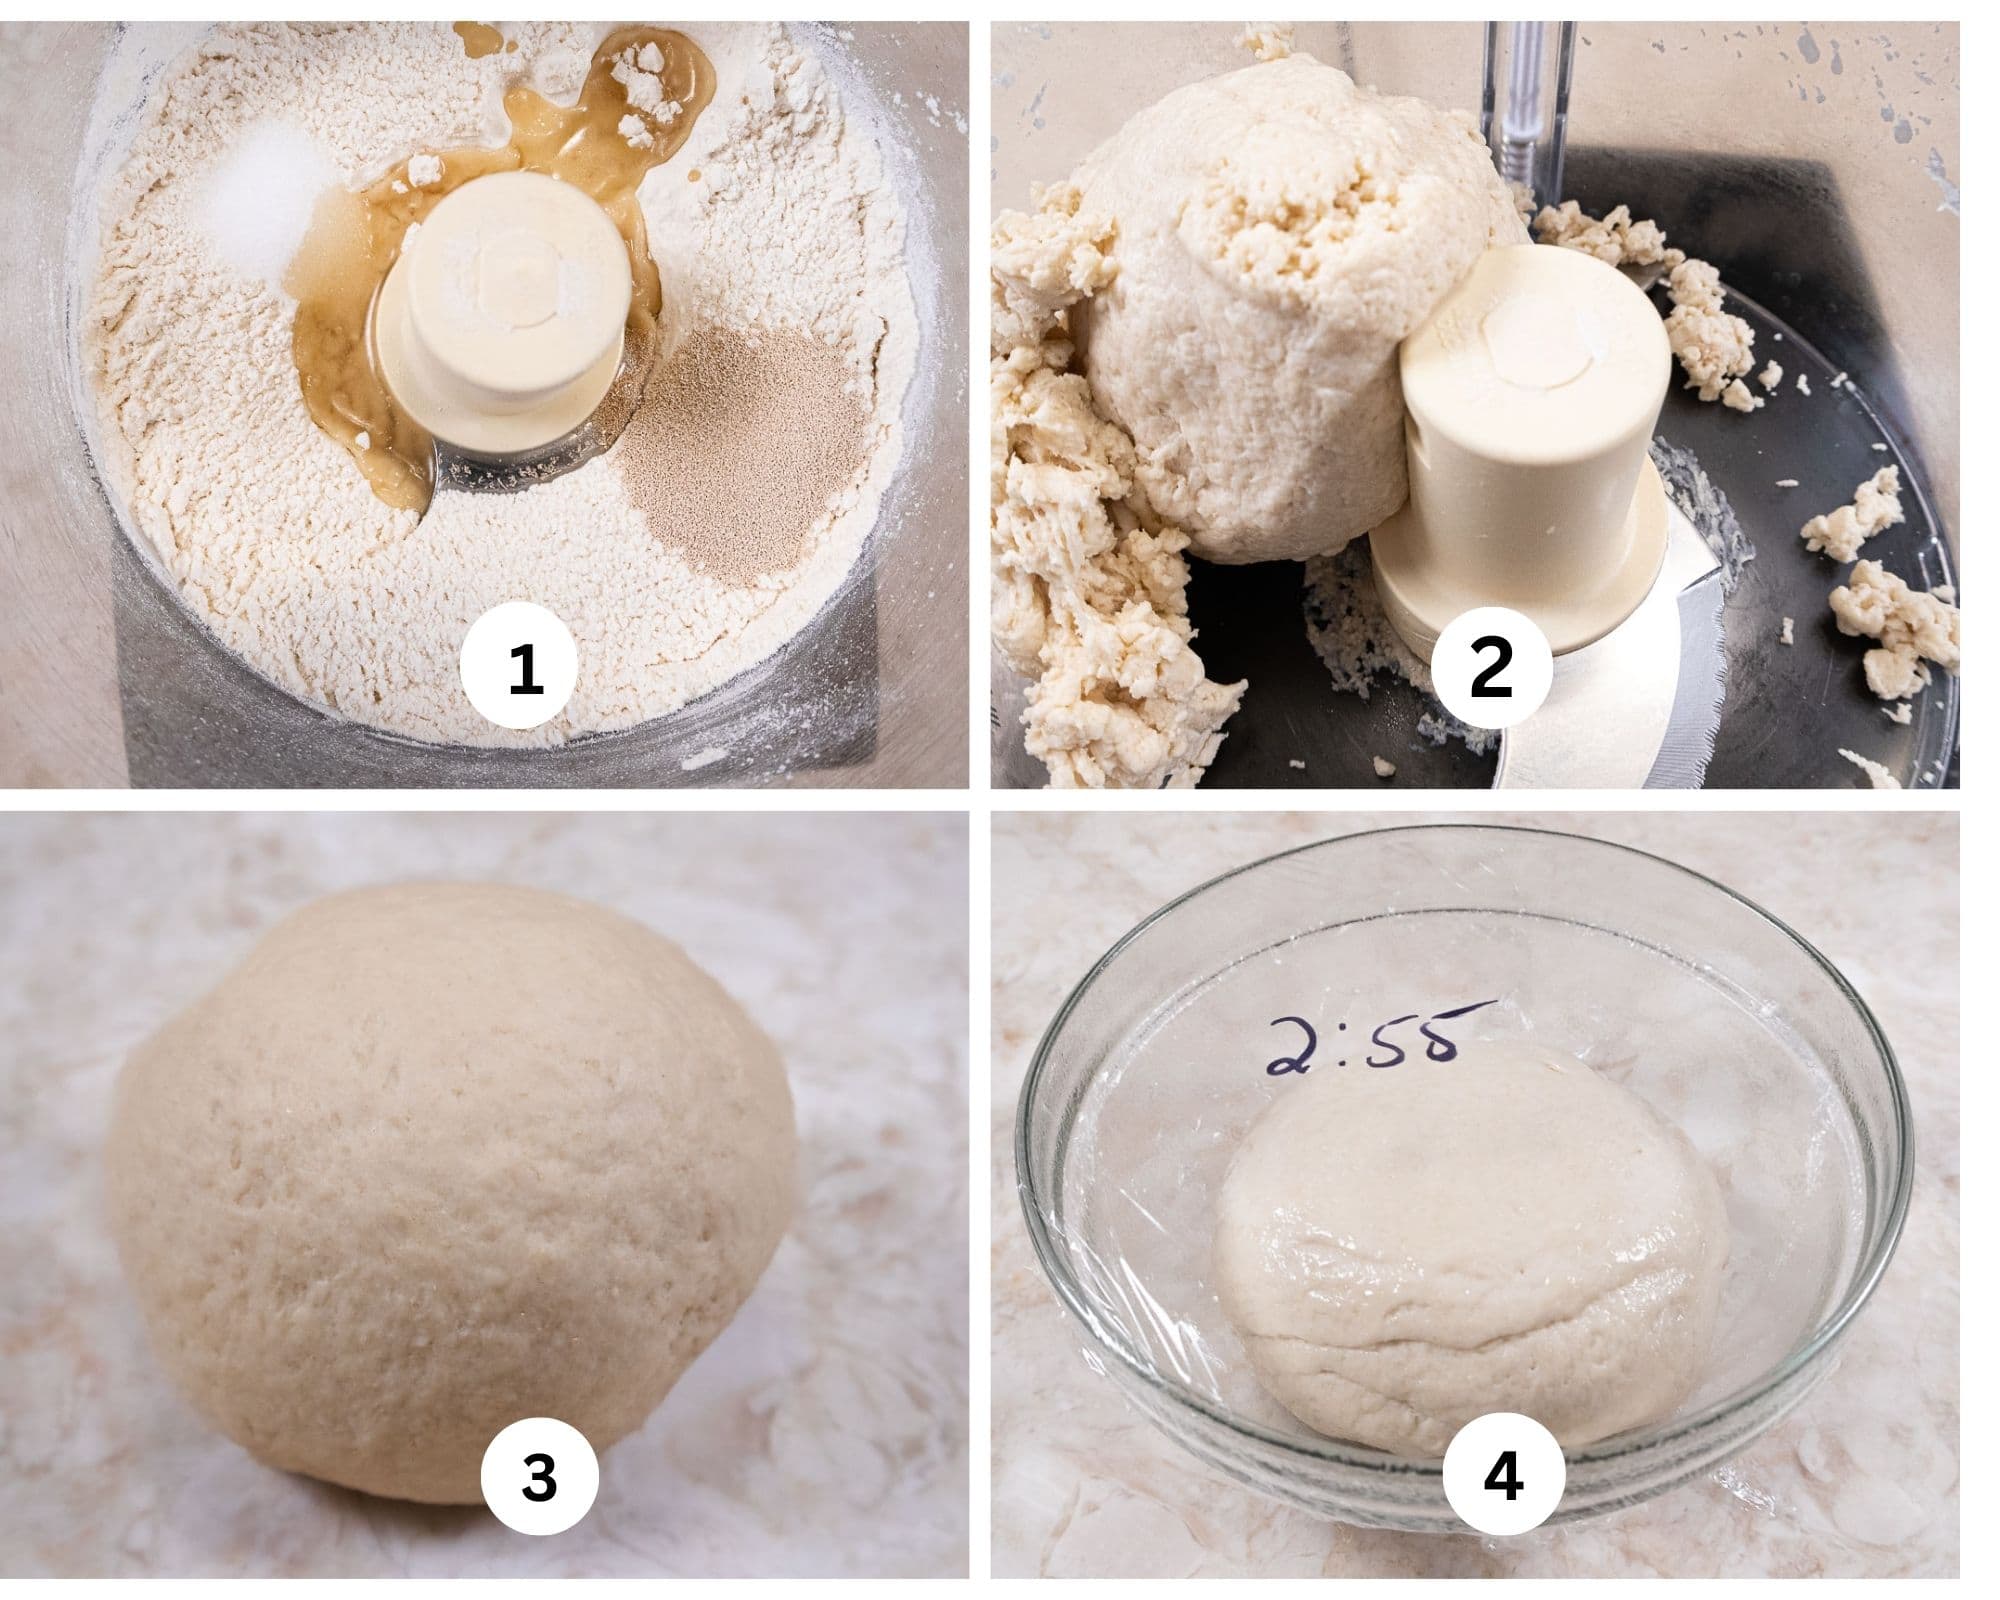 The first collage for the Buttermmilk Flatbreads shows the ingredients in the food processor, then mixed, rolled into a ball and put in a covered bowl to rise.